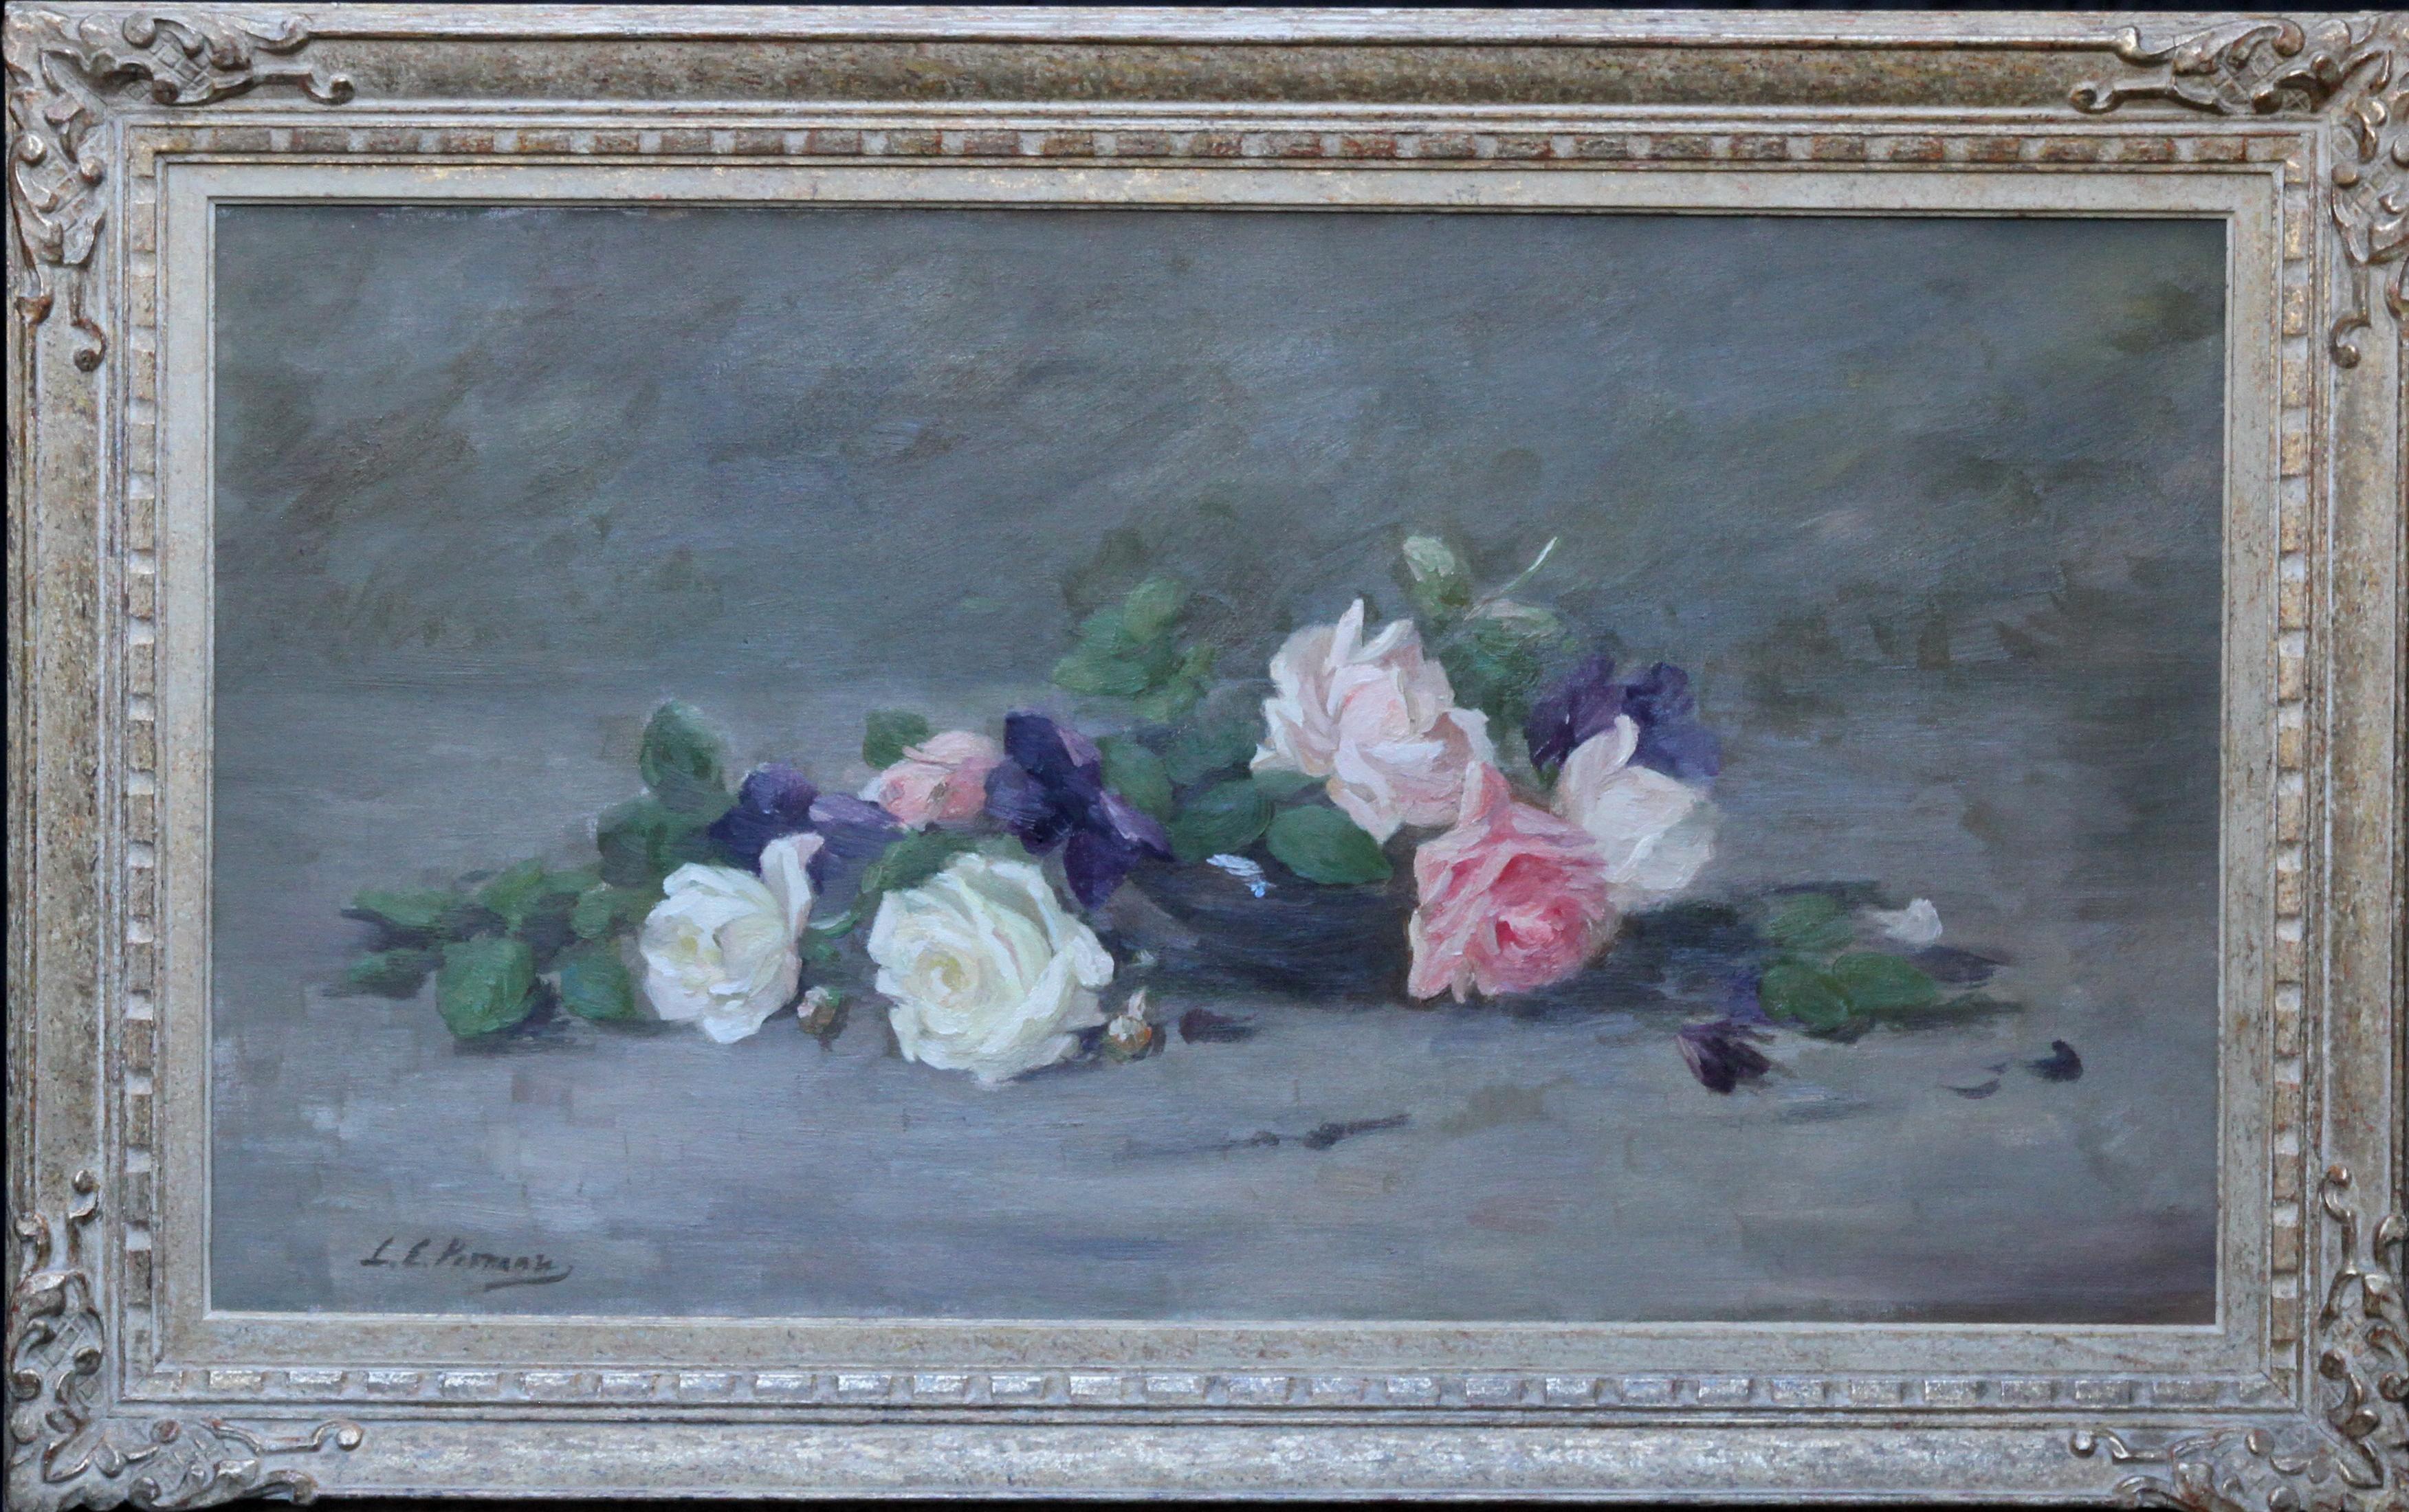 Roses and Violets - Scottish Edwardian art floral oil painting exhib 1908 RSA For Sale 6